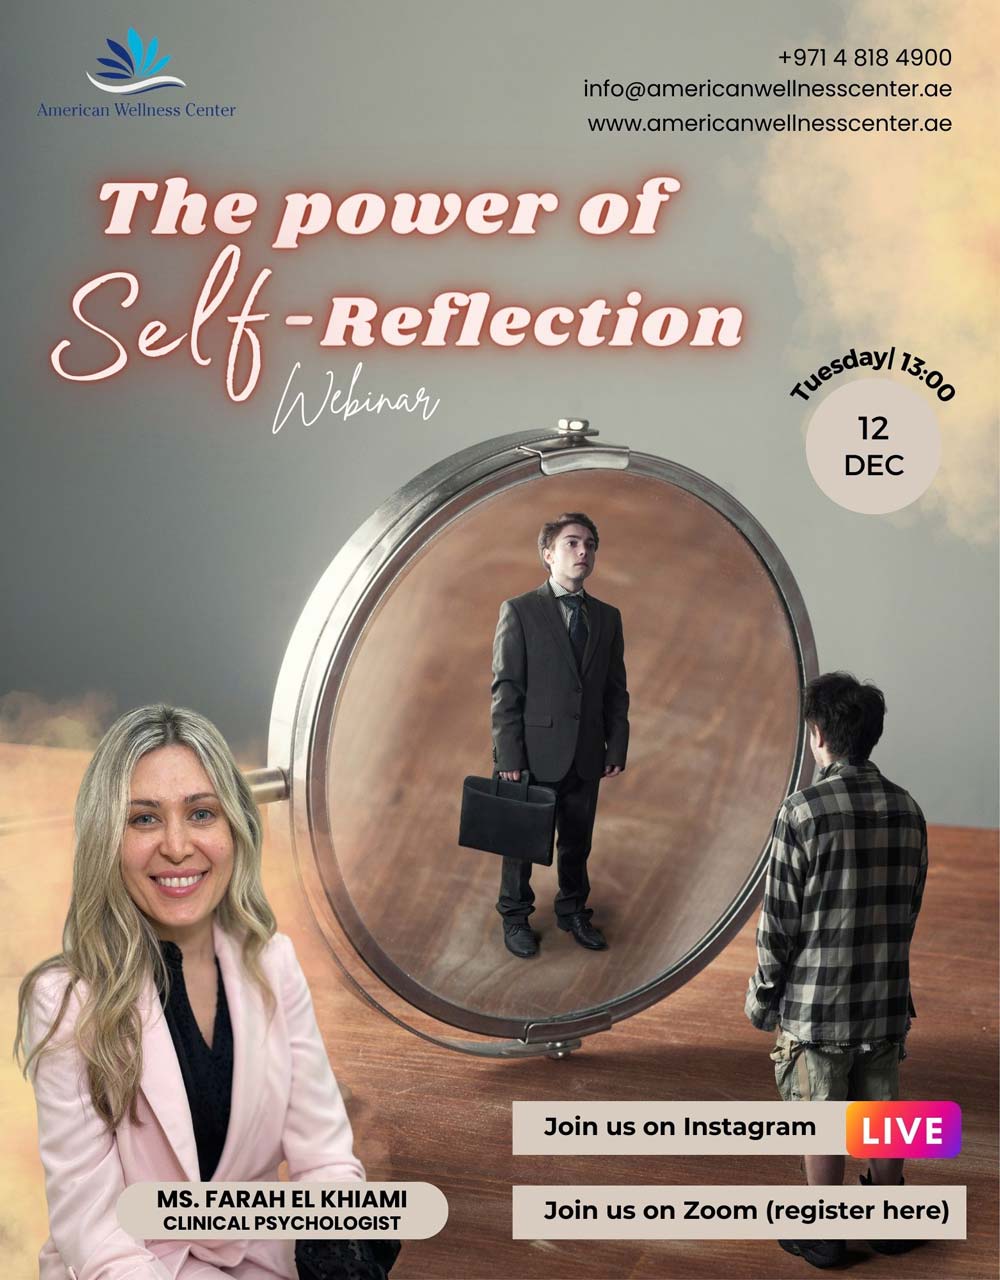 The power of Self-Reflection